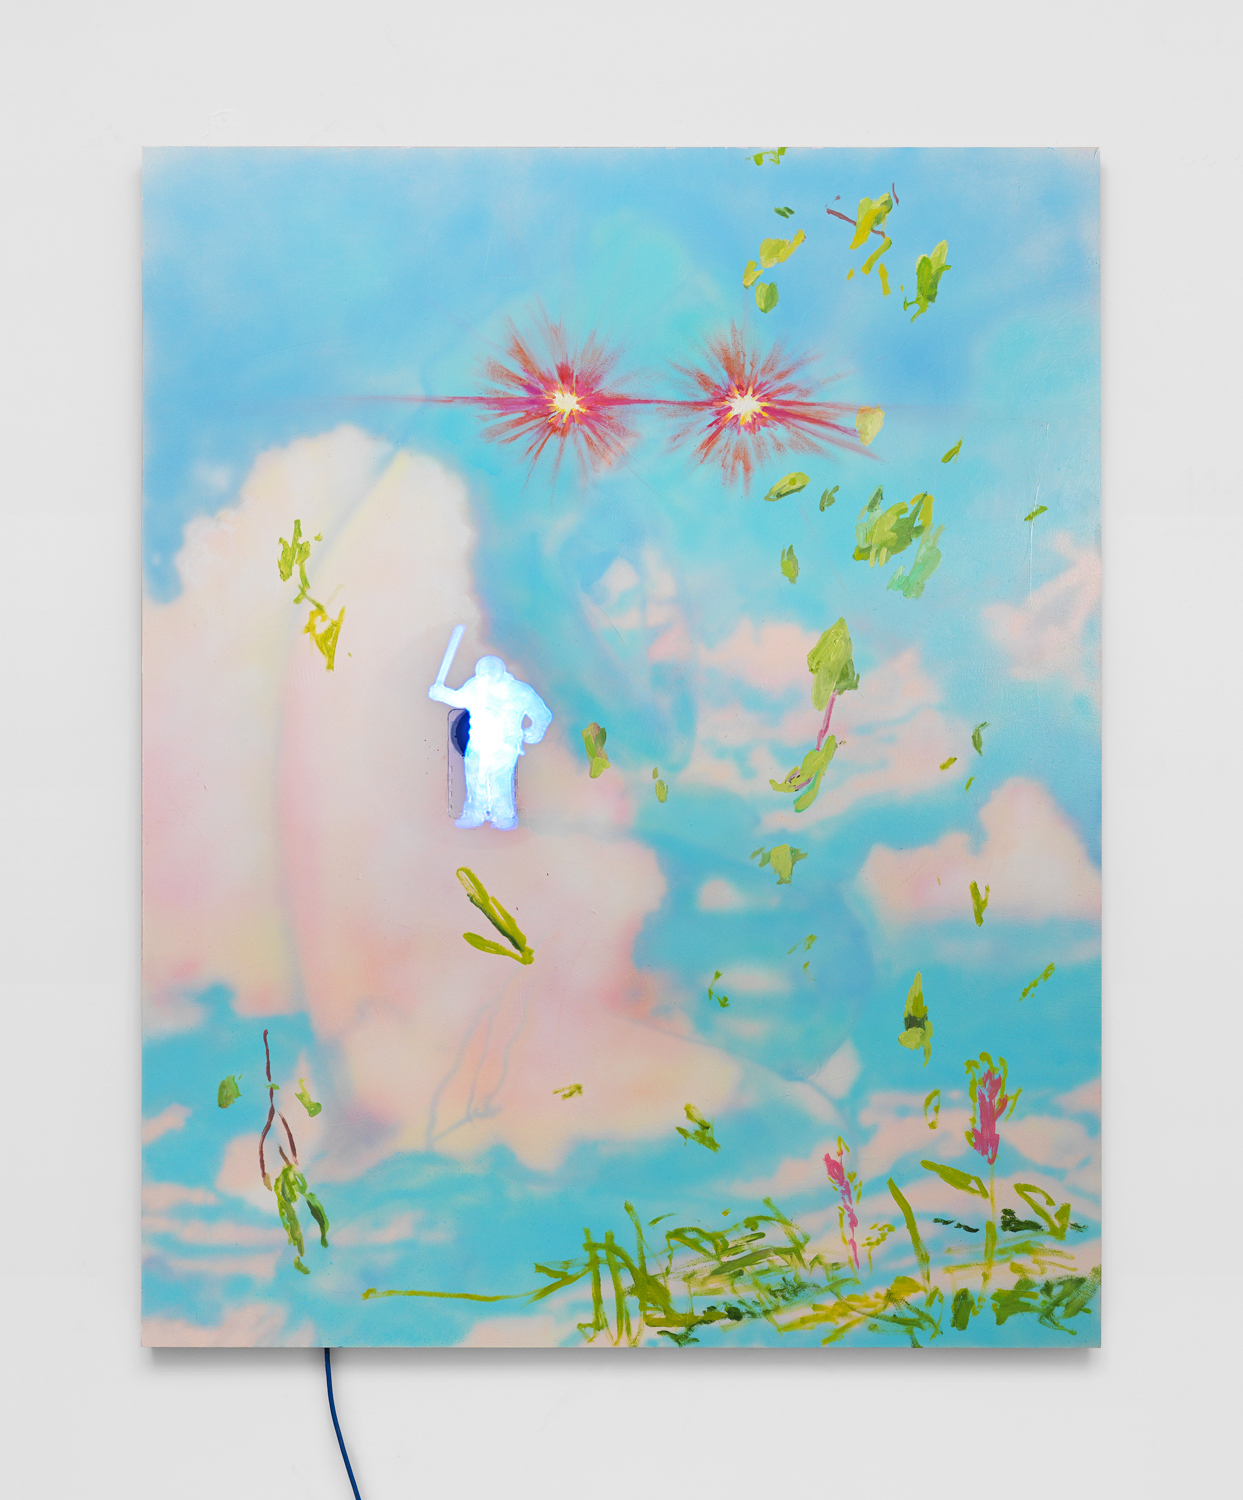 Rachel Rossin, Figment of a Fugue State, 2020, Oil and airbrushed acrylic on panel with embedded holographic display, 60h x 48w in.